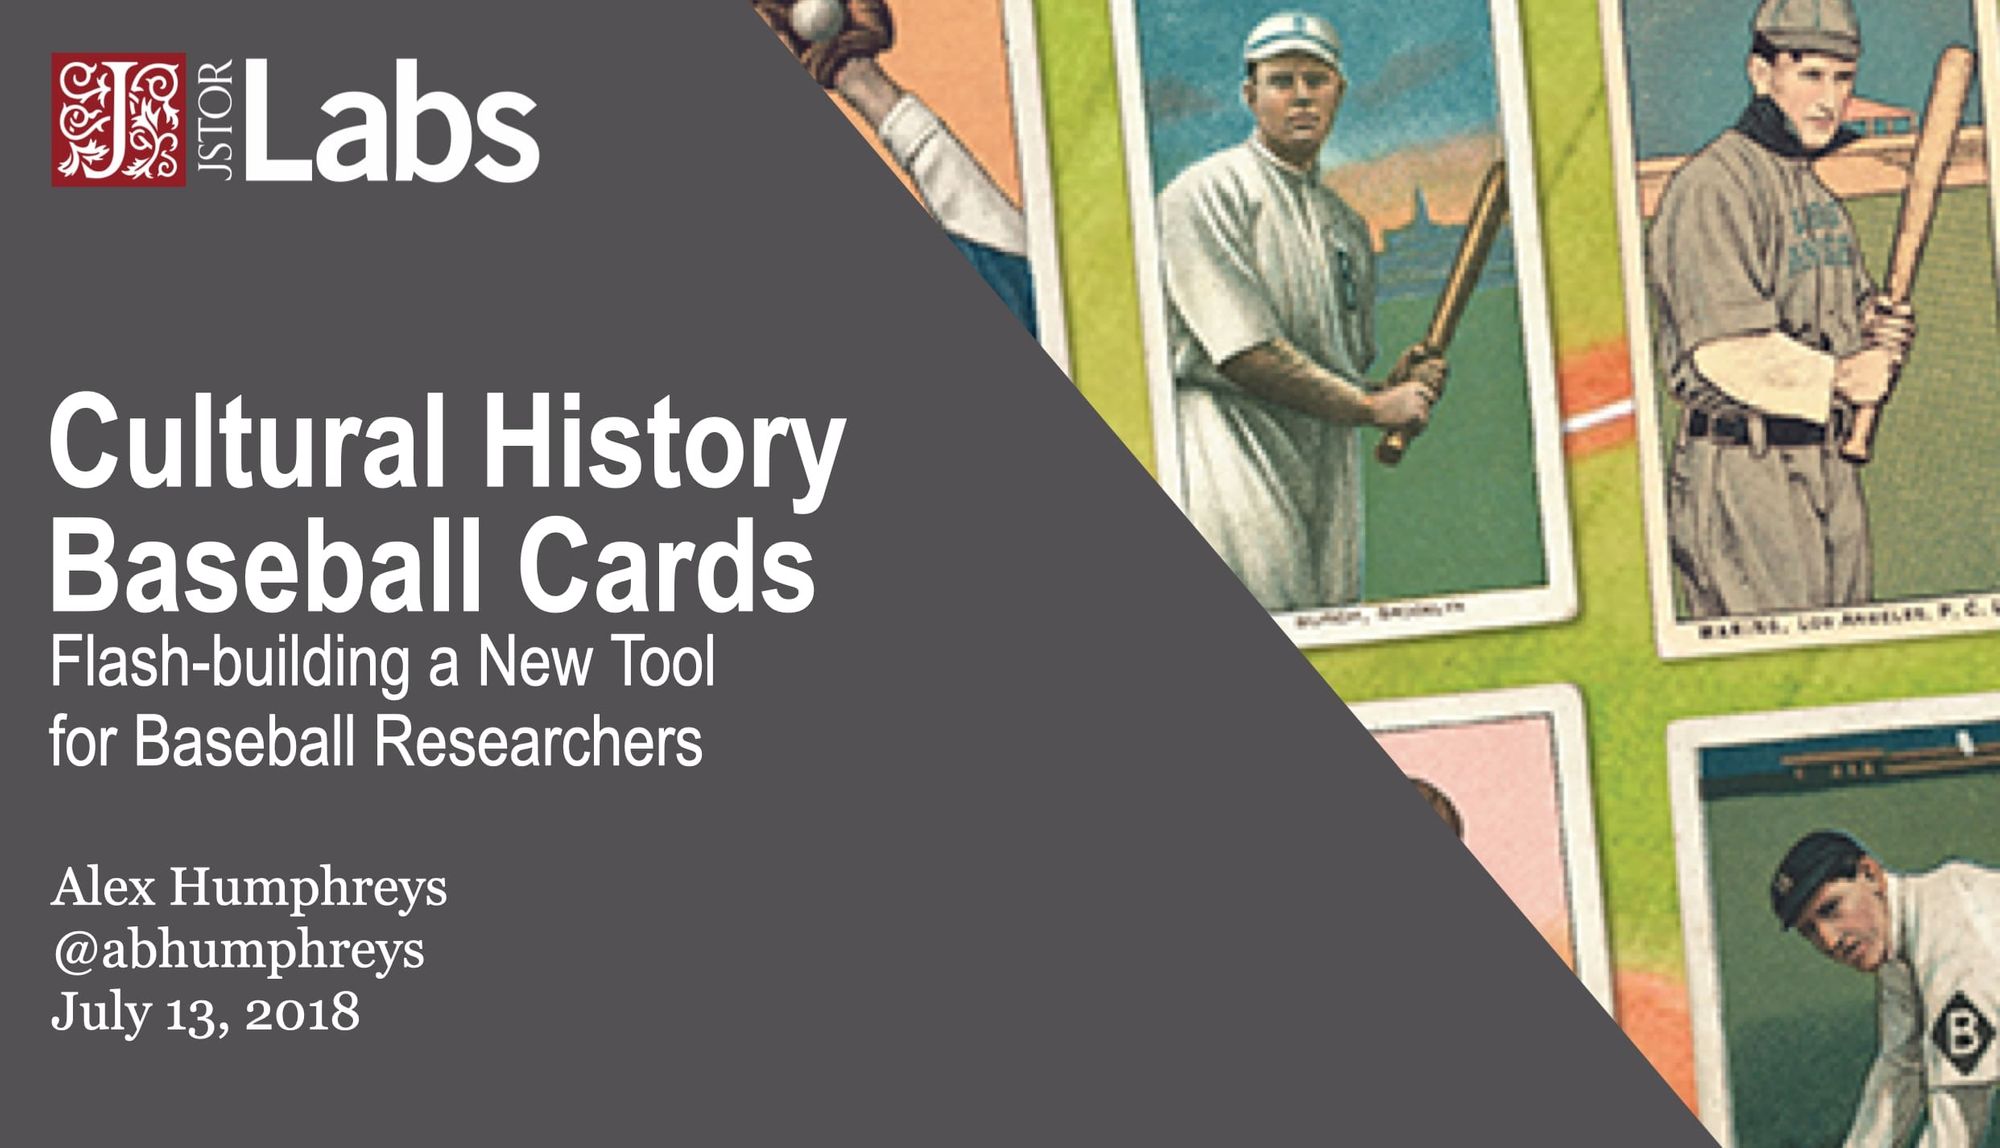 Cultural History Baseball Cards: Flash-building a New Tool for Baseball Researchers